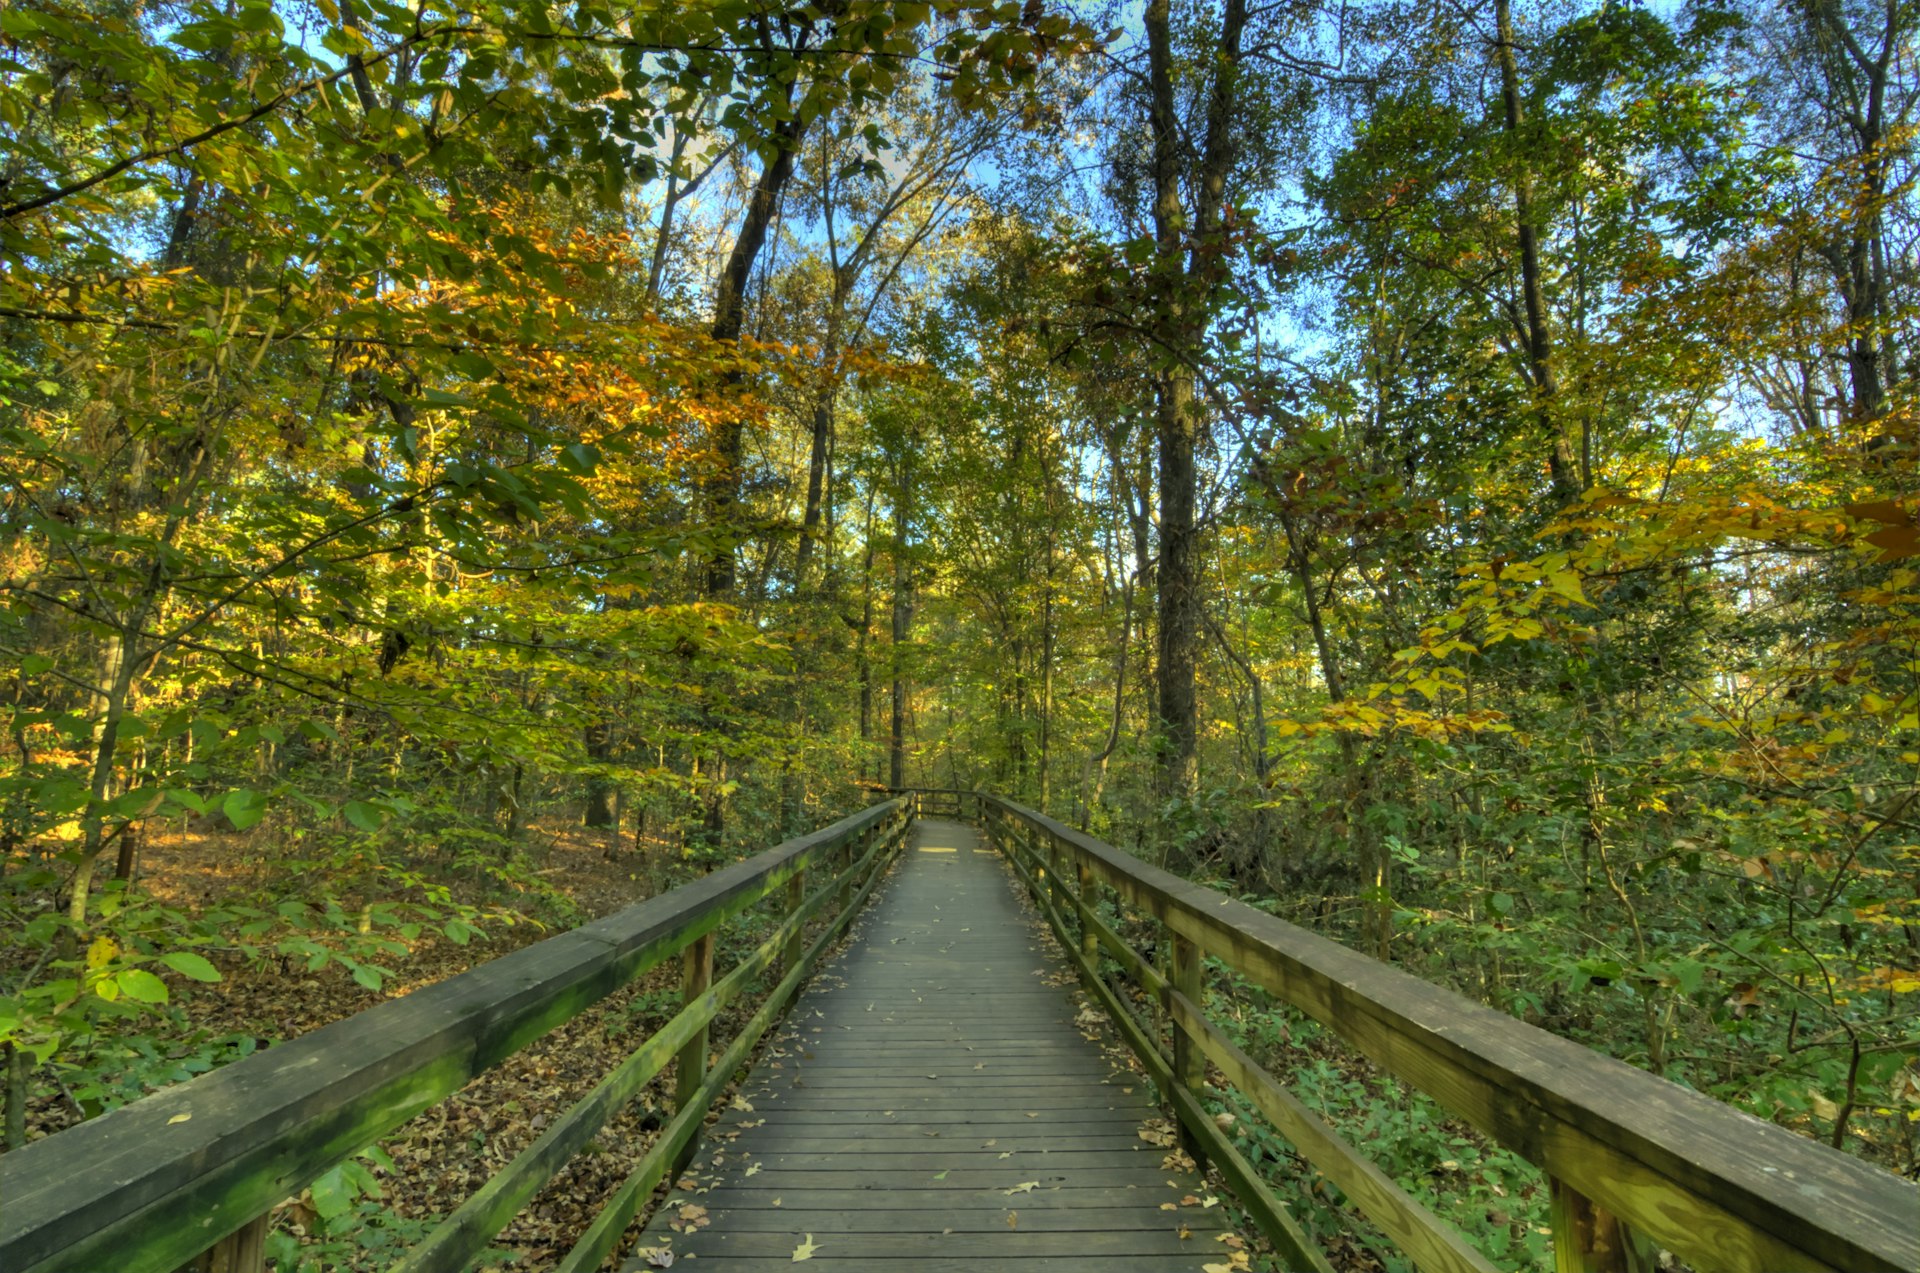 Congaree National Forest Boardwalk in the Autumn afternoon